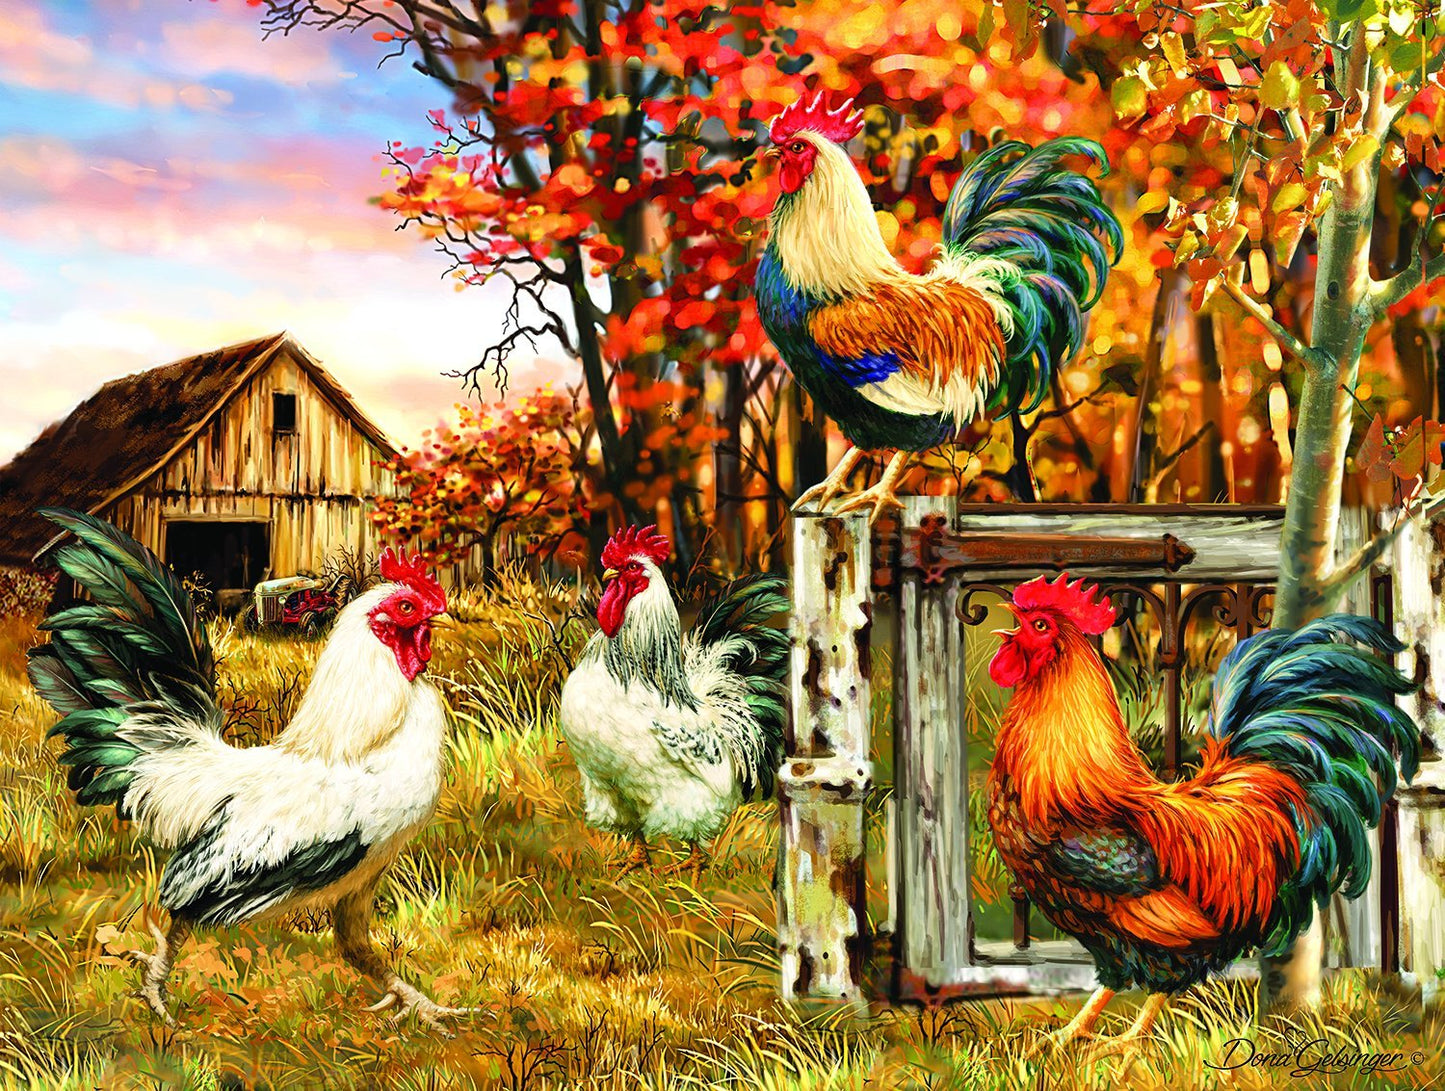 Diamond Painting Of Farm Roosters